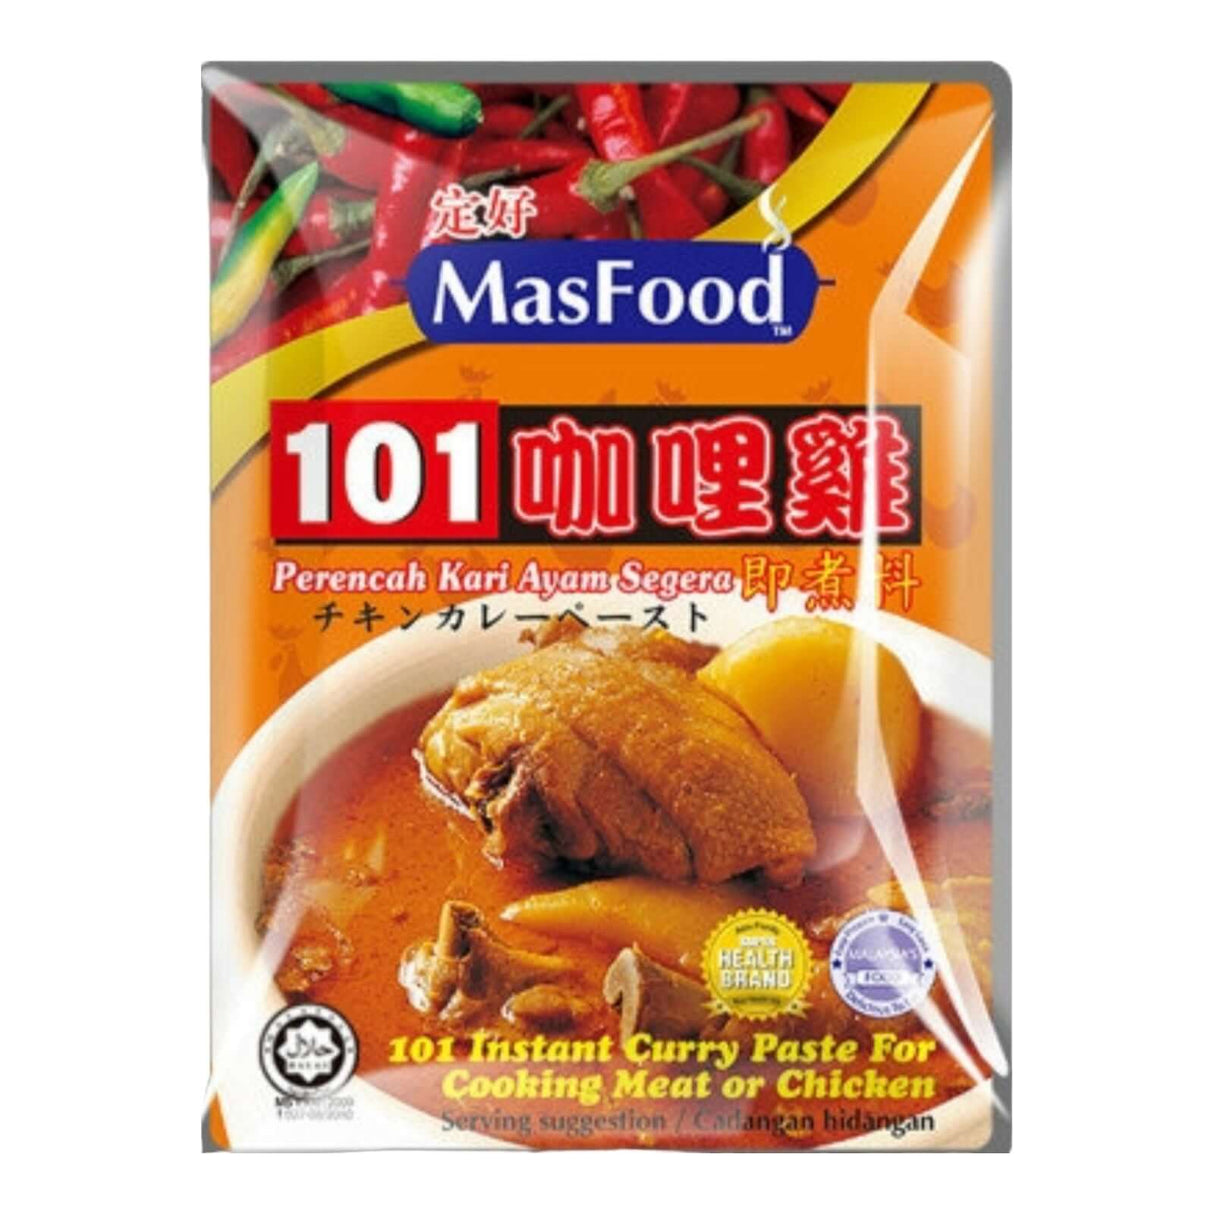 MasFood 101 Instant Curry Paste For Cooking Meat or Chicken